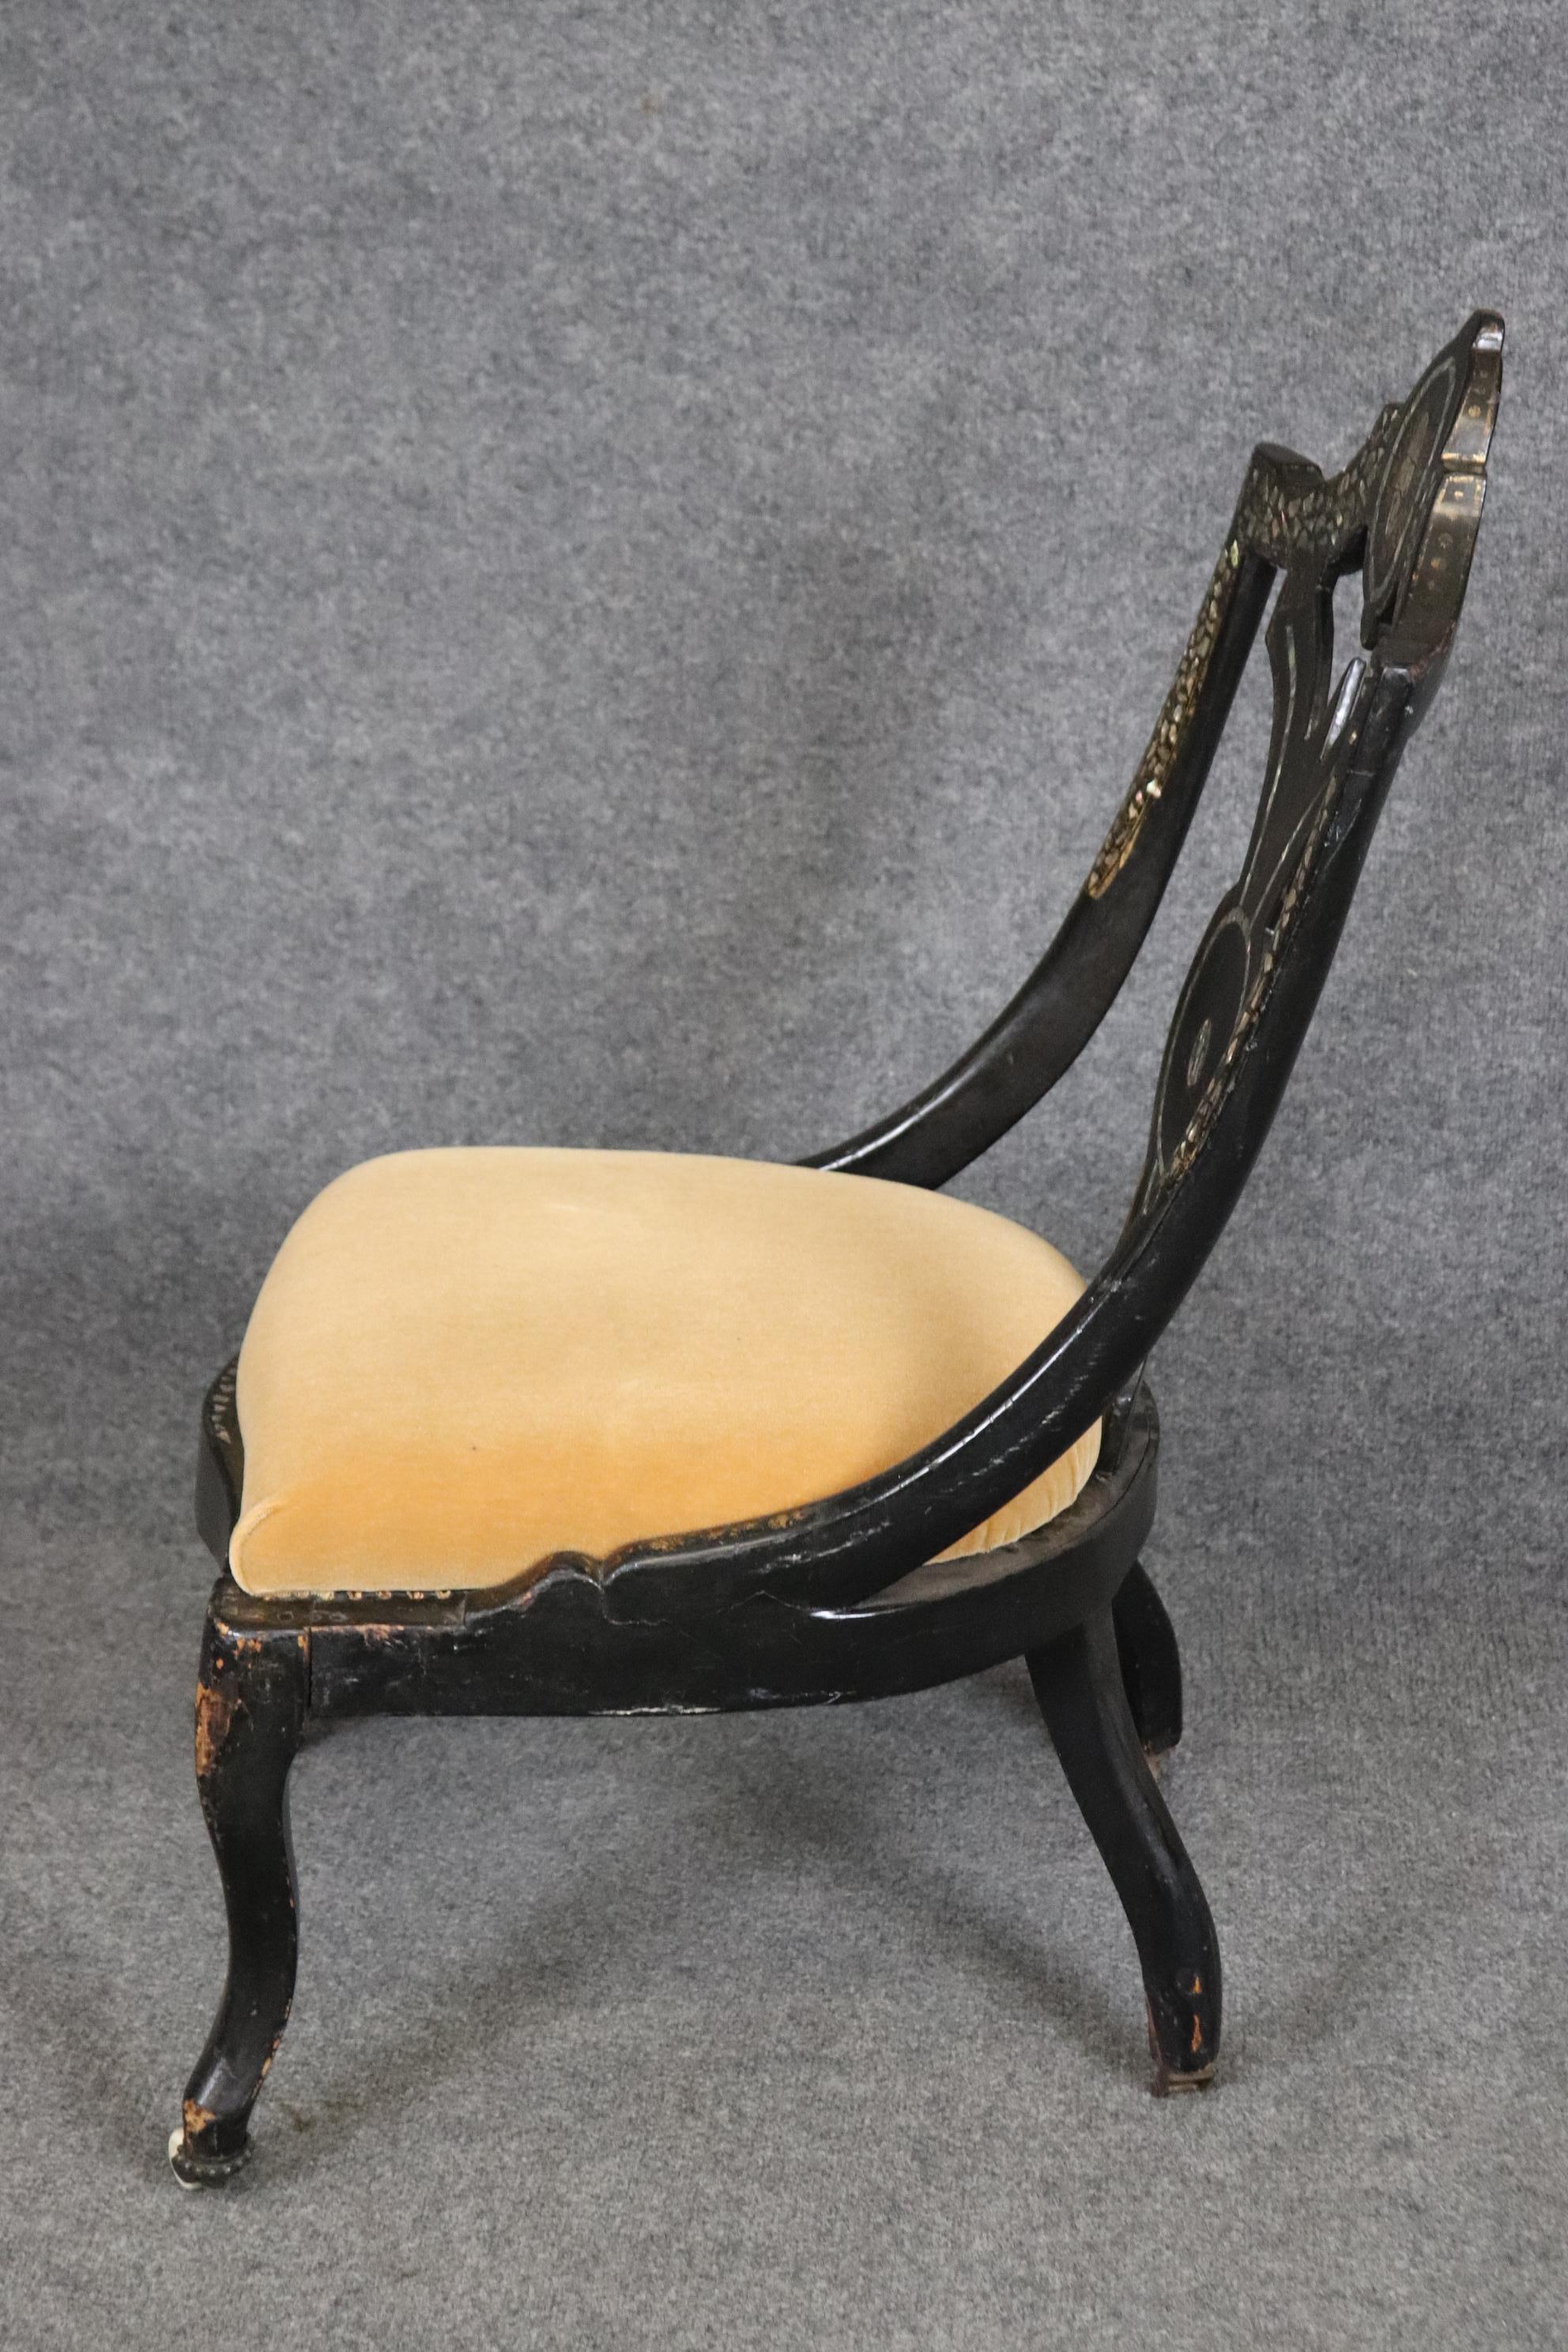 Antique 19th Century Victorian Ebonized Mother of Pearl Inlaid Slipper Chair In Fair Condition For Sale In Swedesboro, NJ